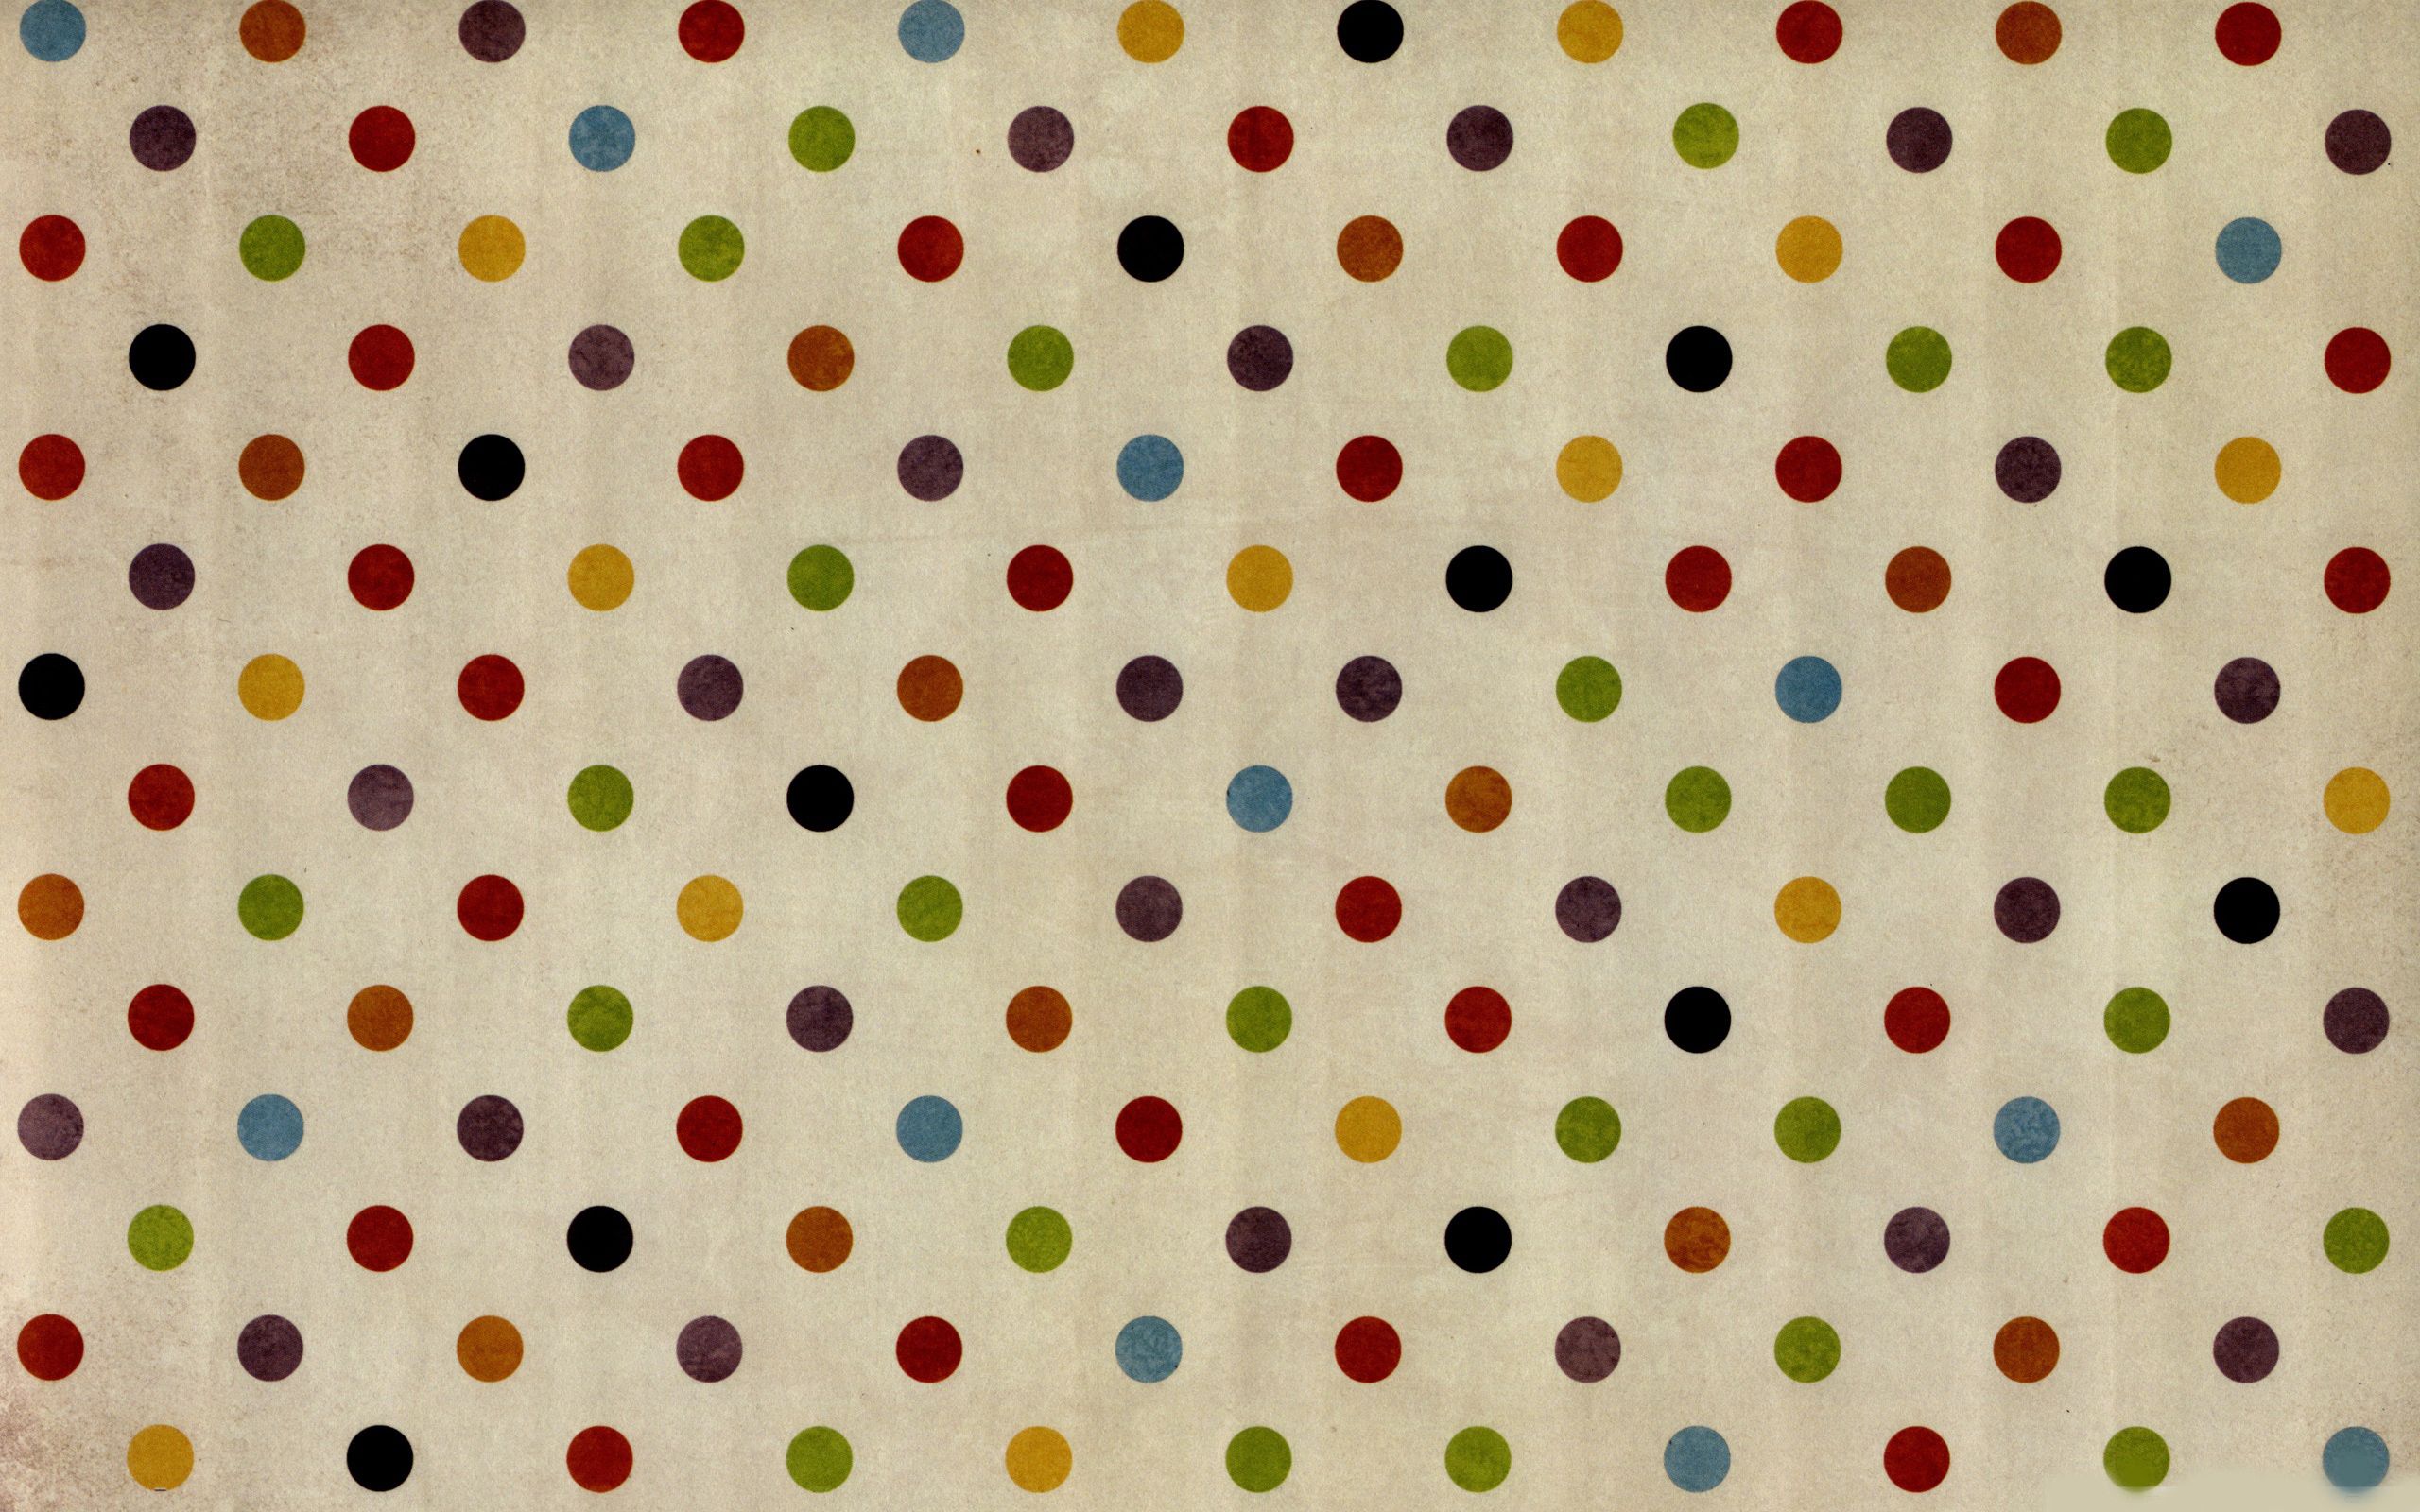 motley, textures, texture, circles, multicolored, surface Full HD